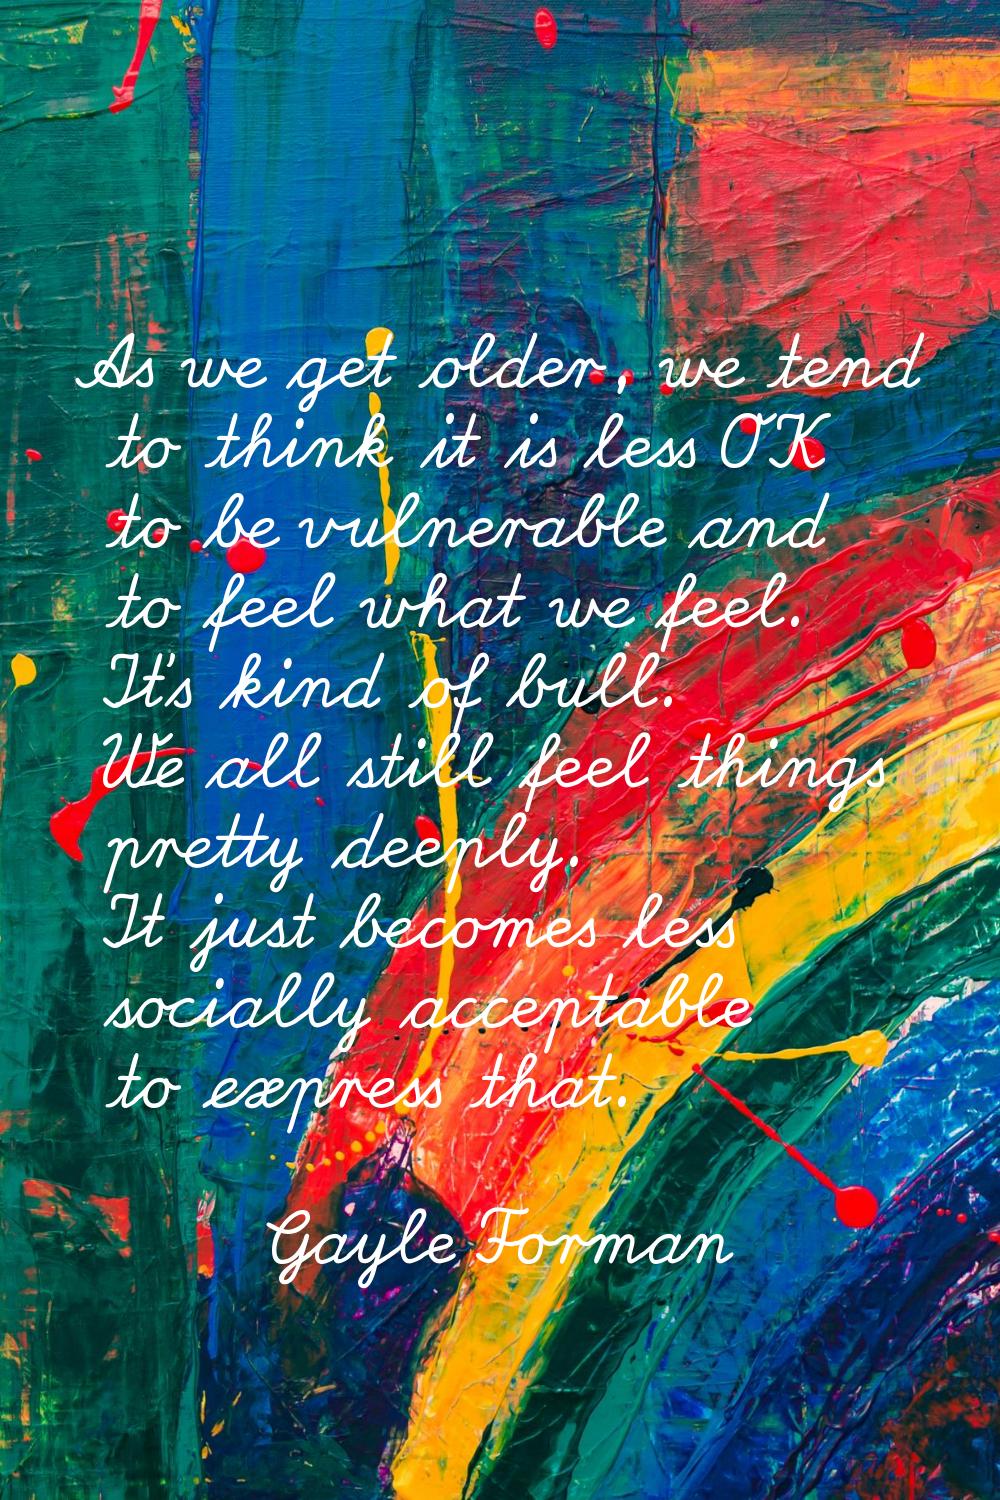 As we get older, we tend to think it is less OK to be vulnerable and to feel what we feel. It's kin